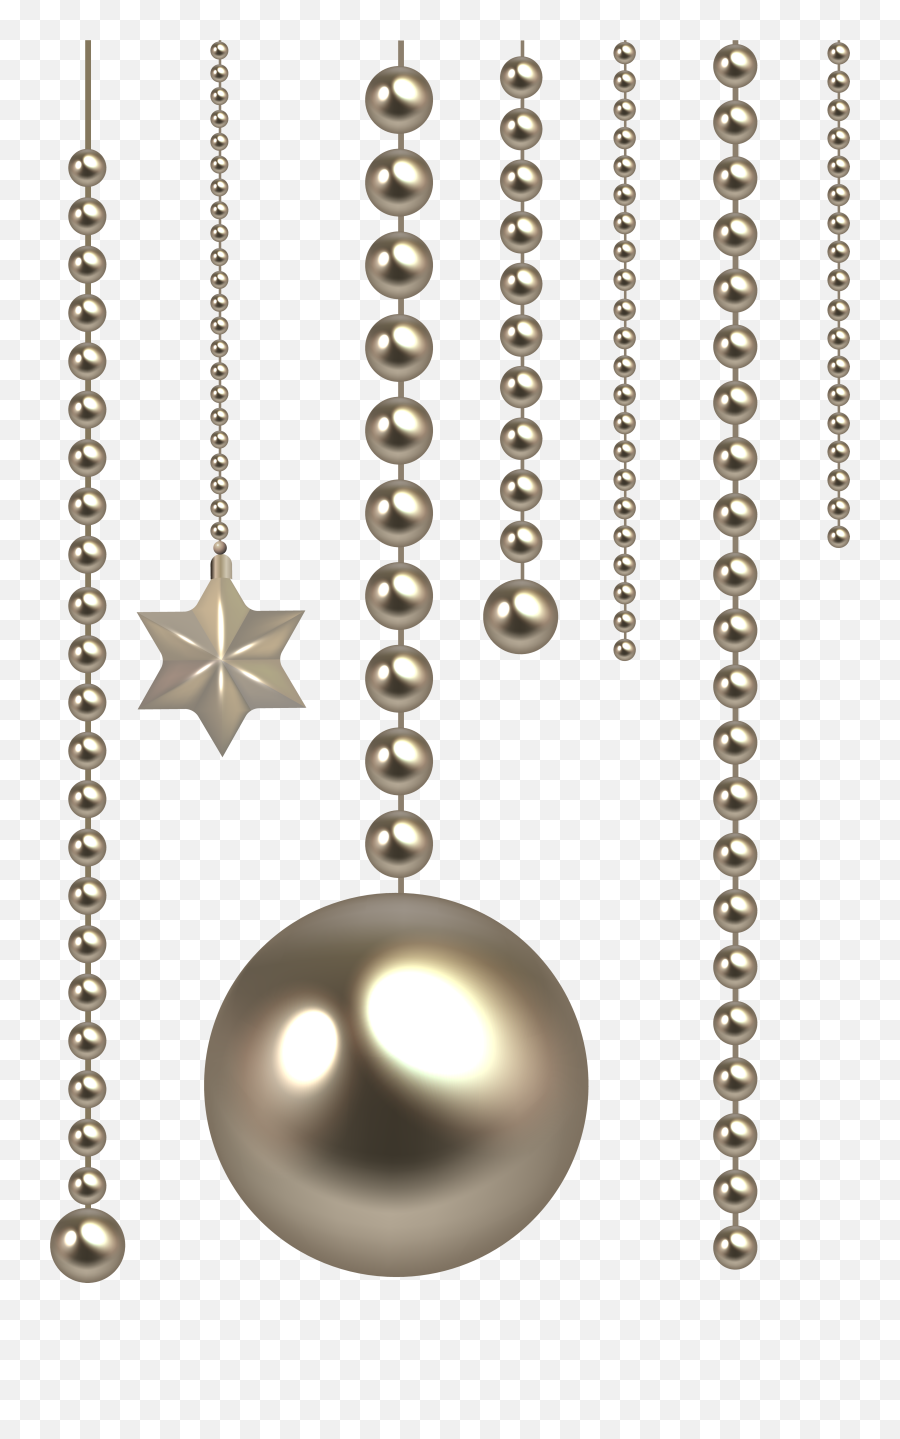 Hd Beads Png Transparent Image - Portable Network Graphics,Beads Png